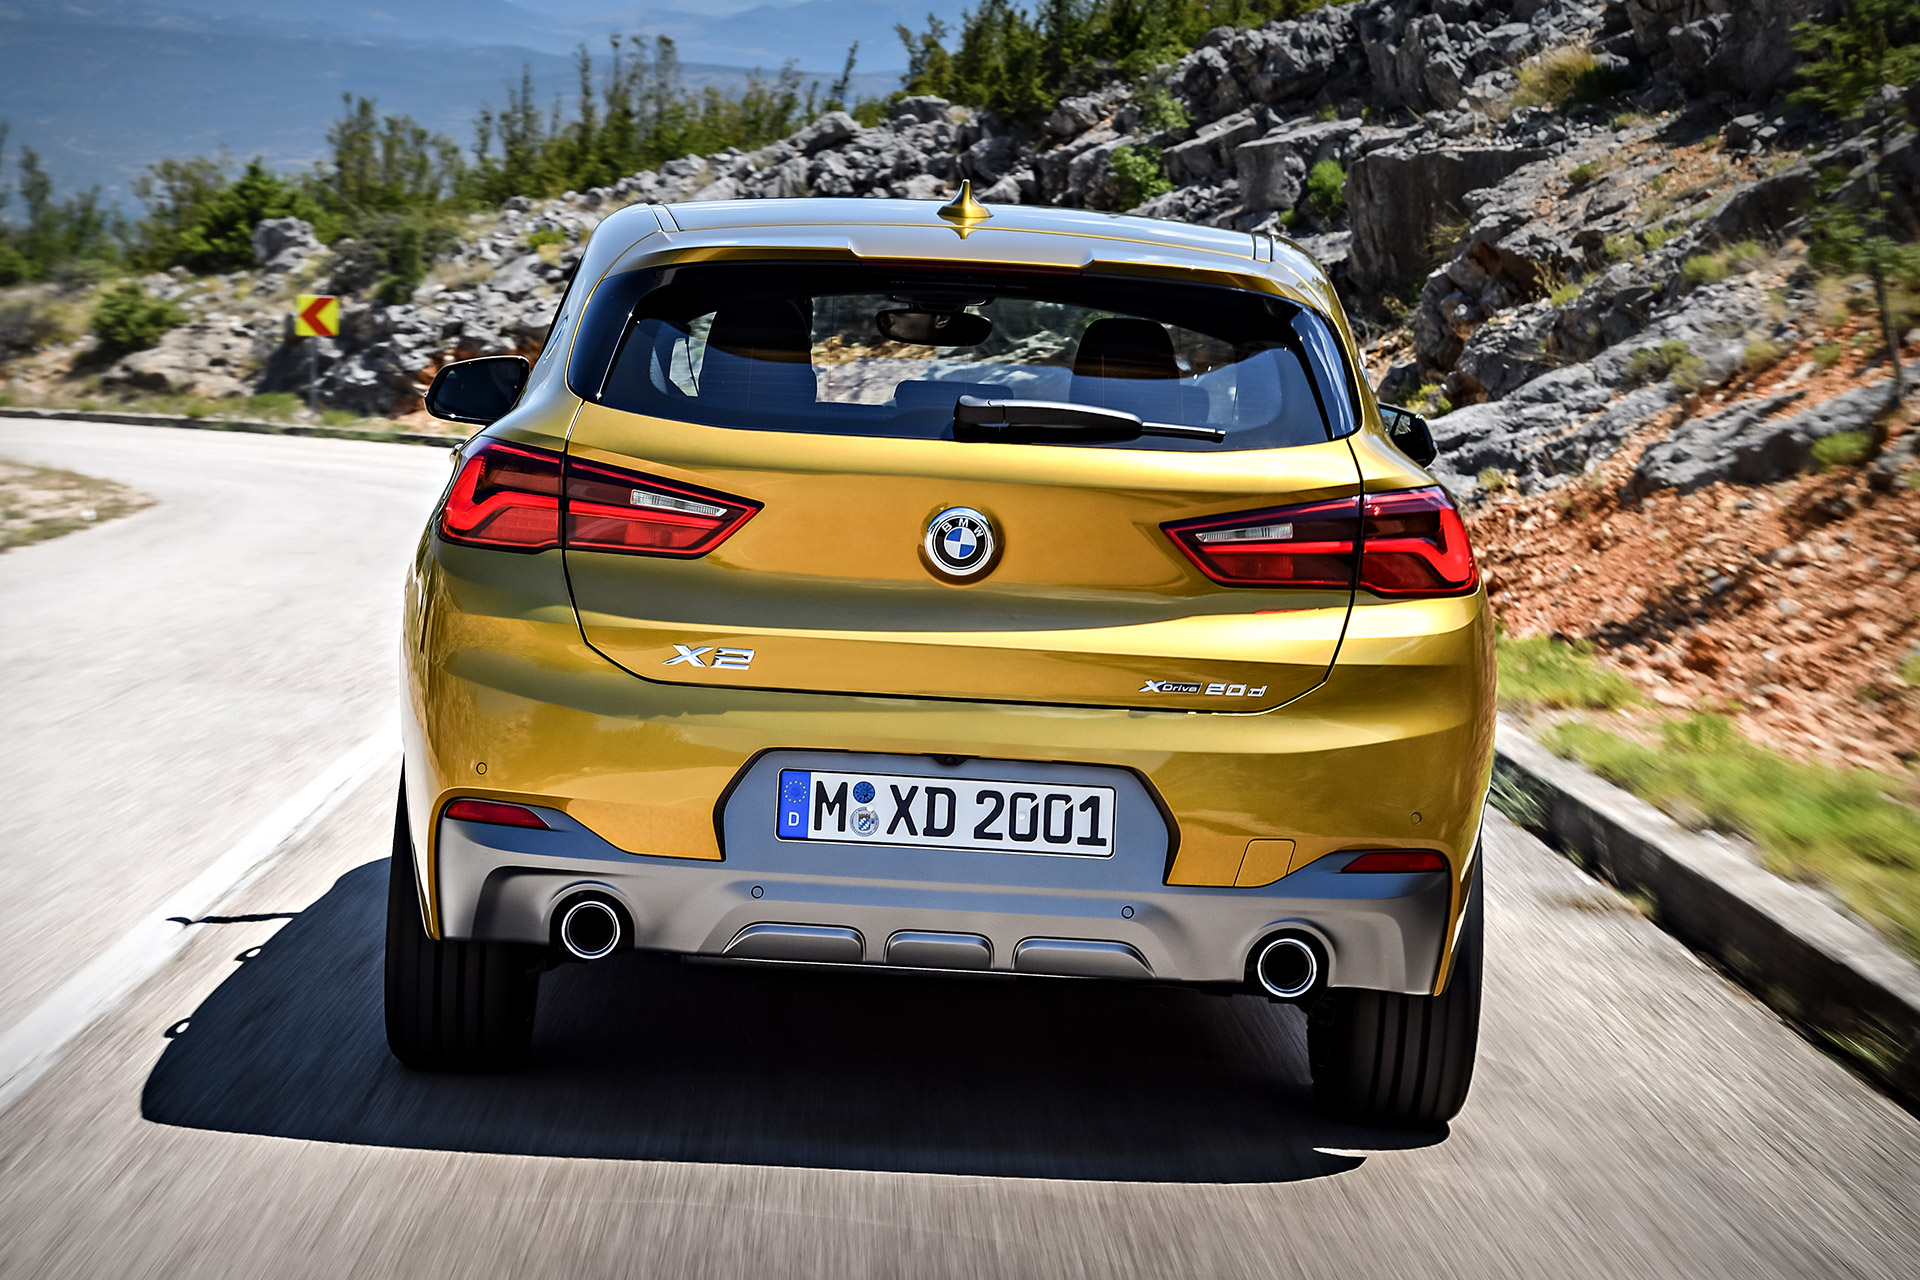 BMW X2 SUV | Uncrate